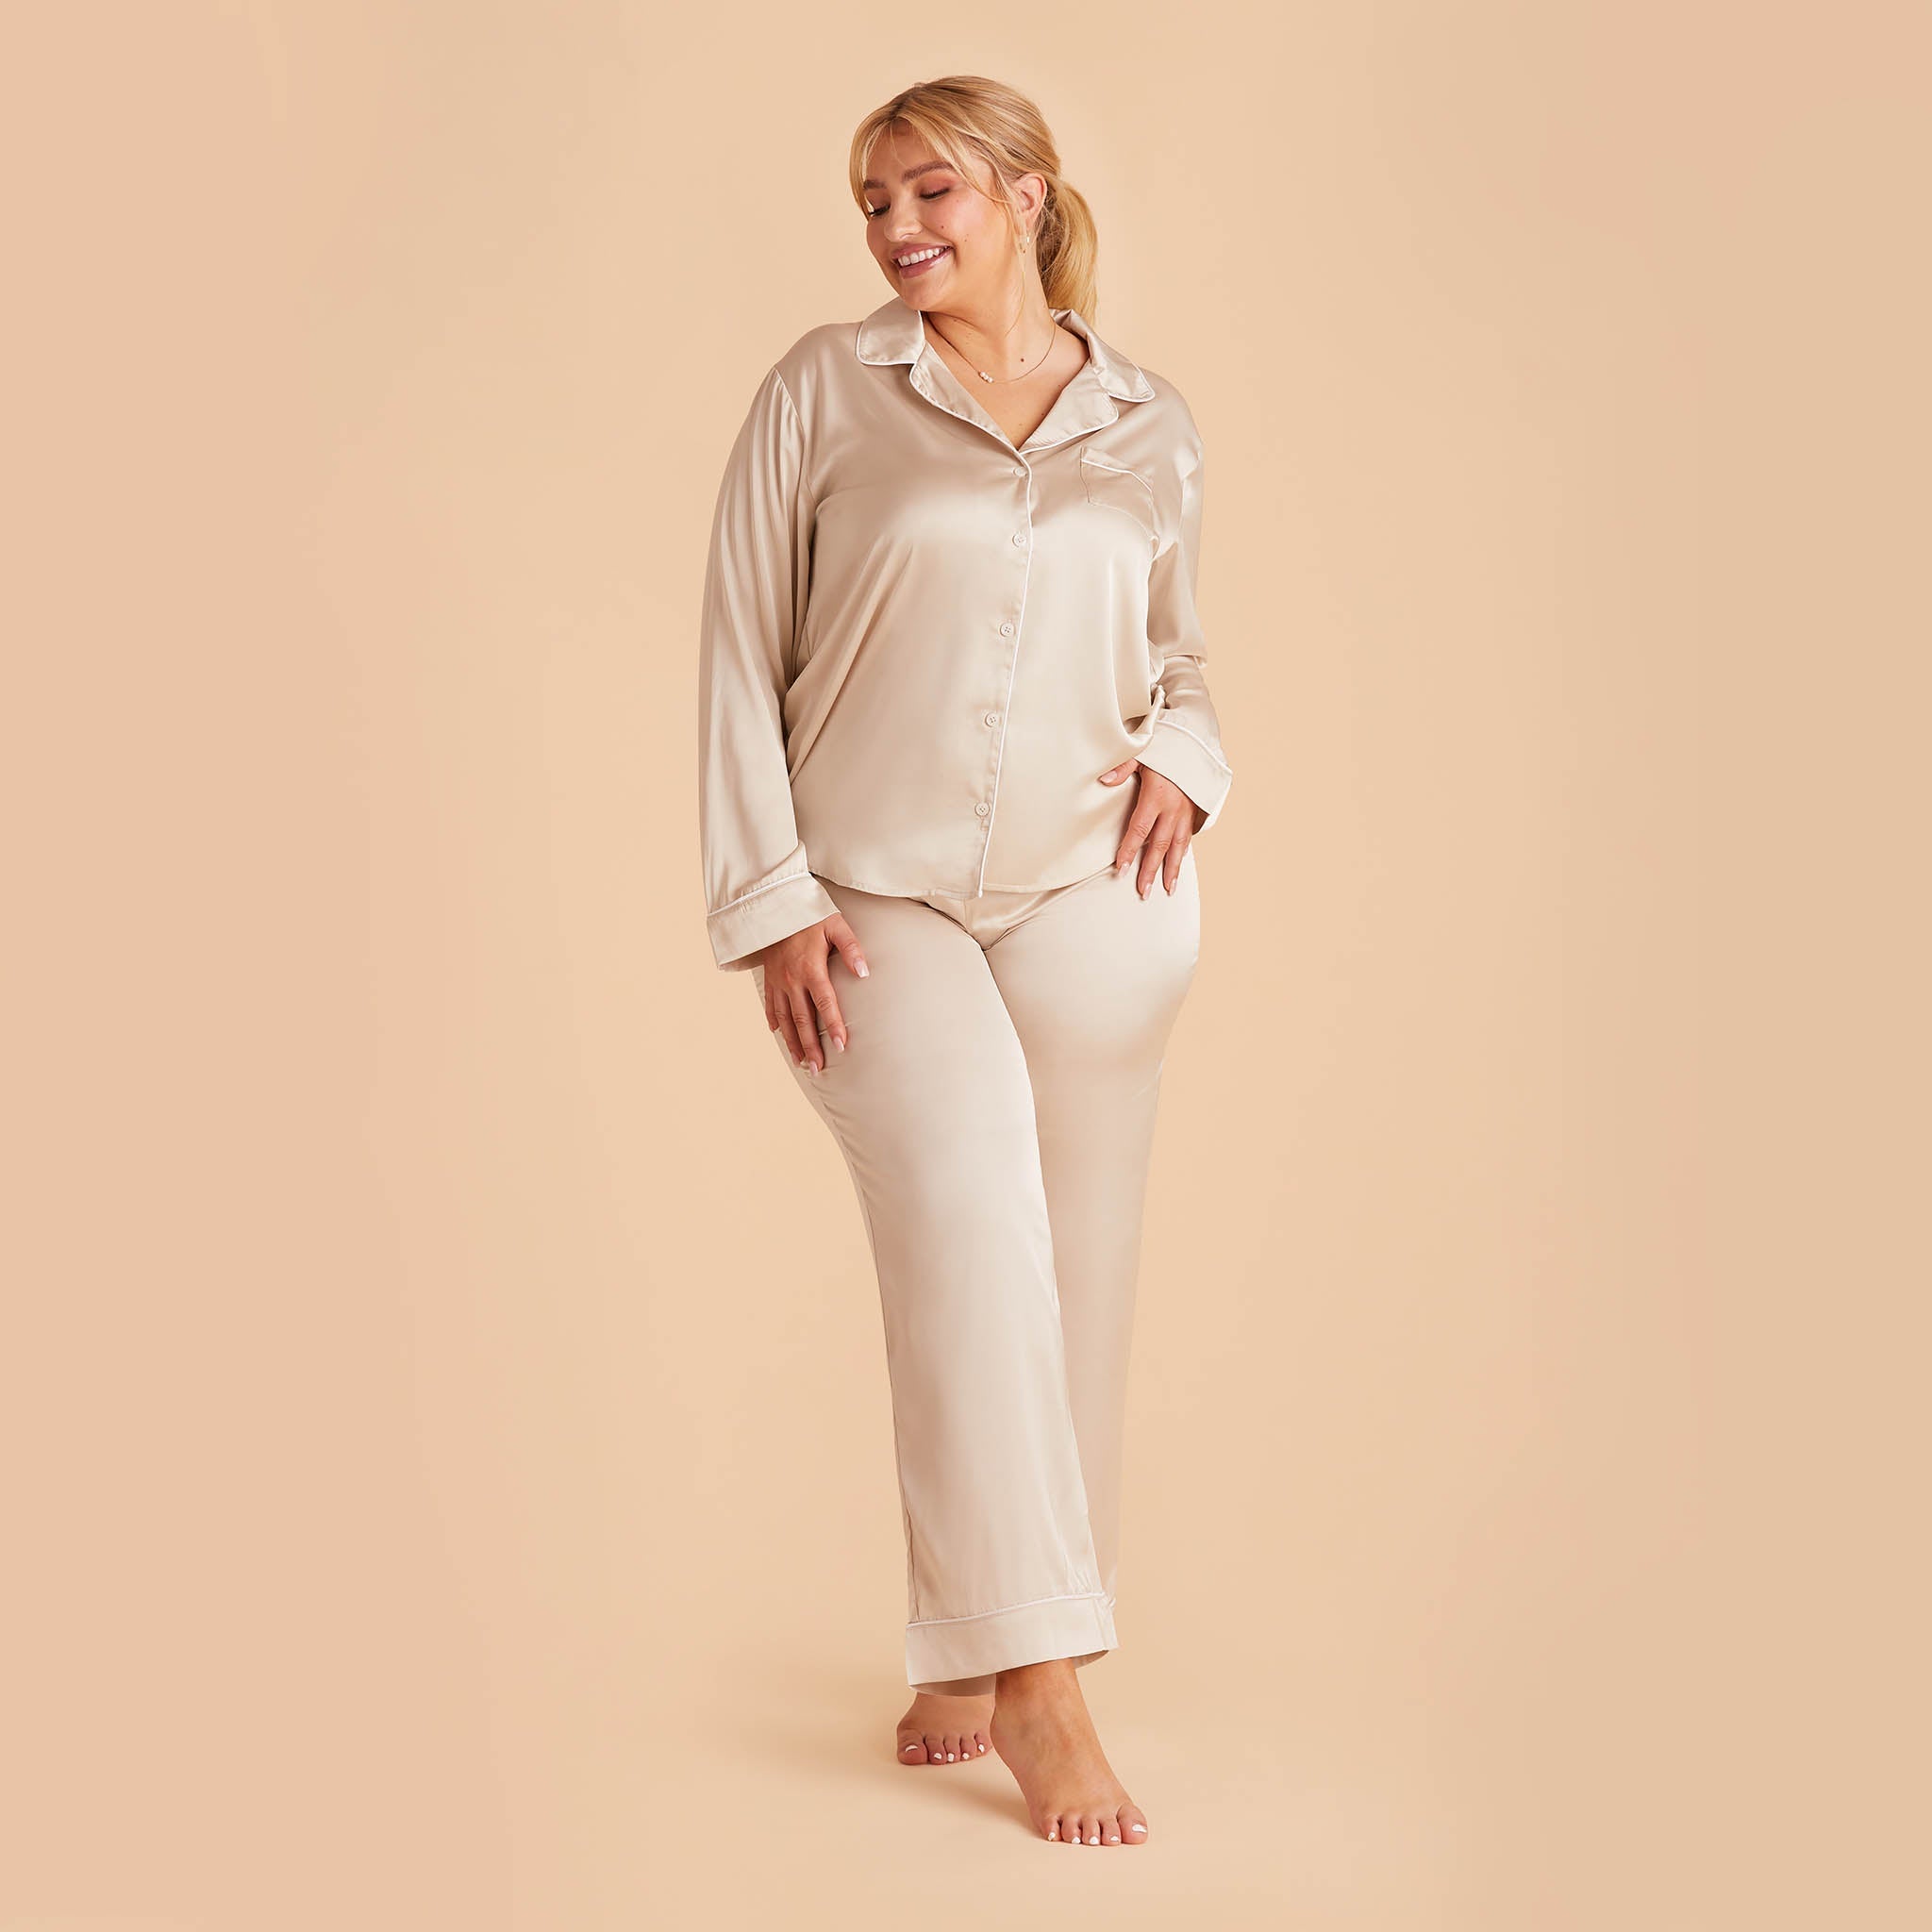 Jonny Plus Size Satin Long Sleeve Pajama Top With White Piping in champagne, front view